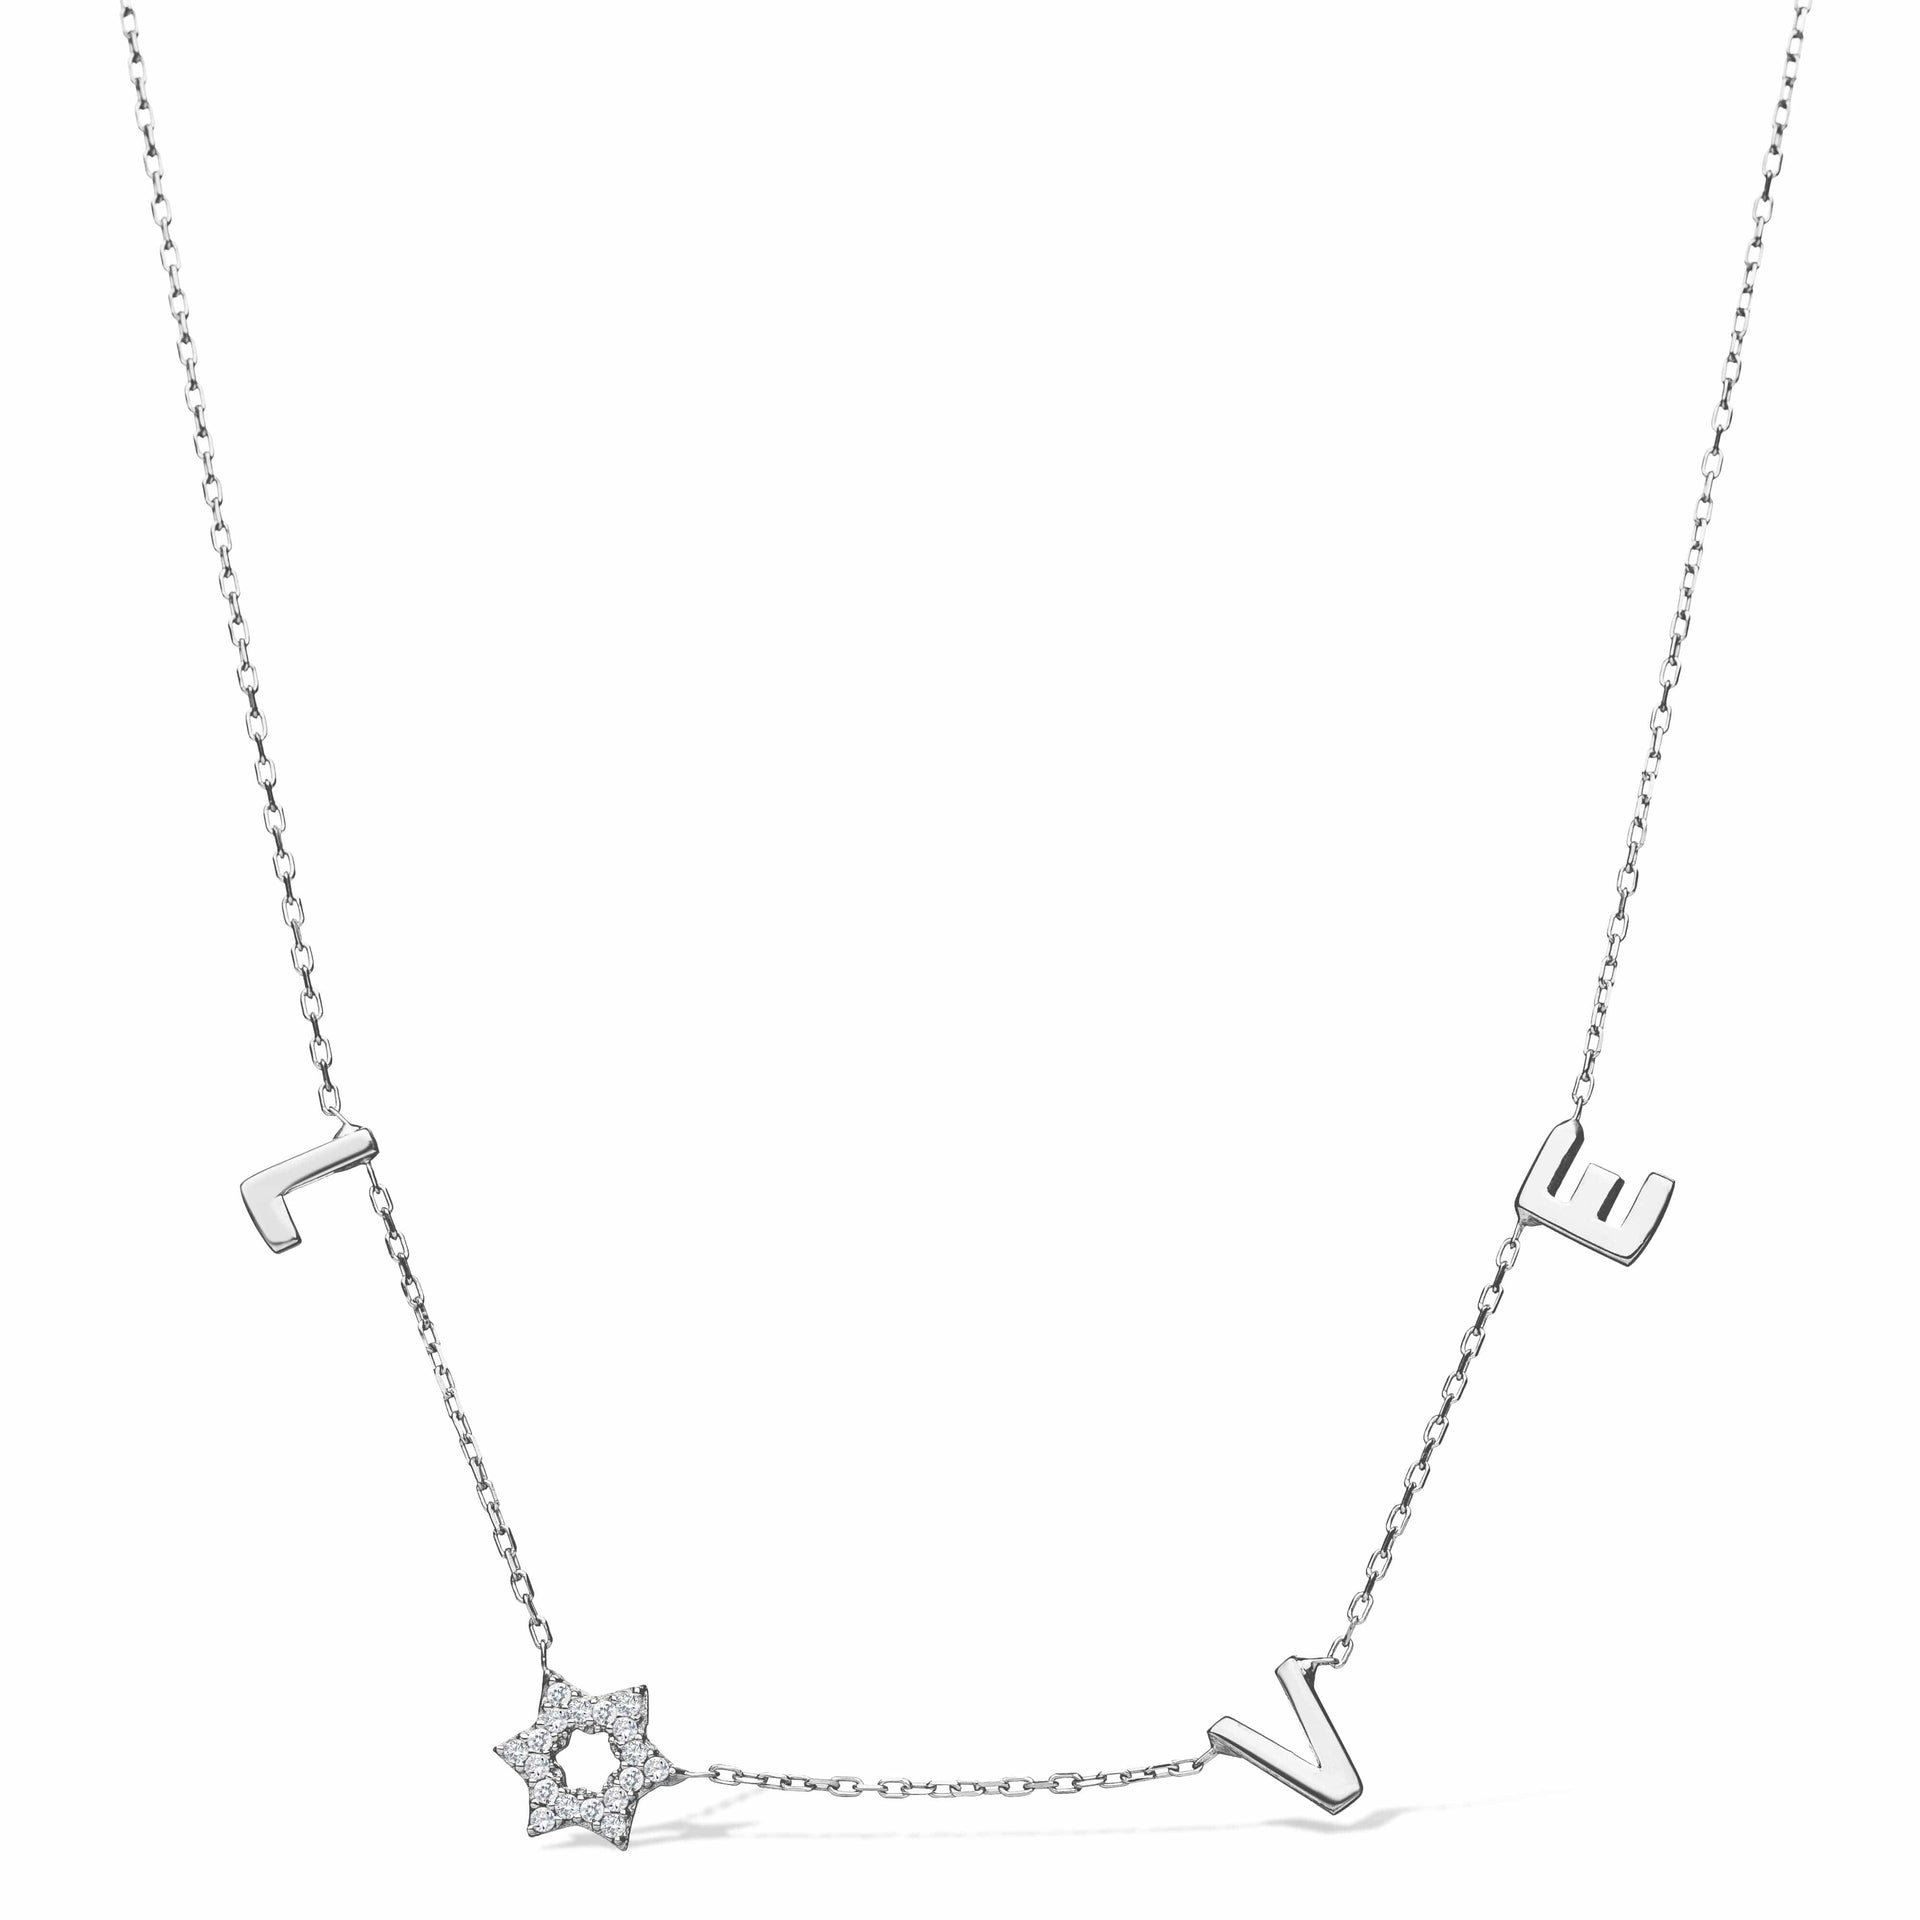 Alef Bet Necklaces White Gold Love Necklace in 14k Gold with Diamond Star of David - White Gold, Gold or Rose Gold